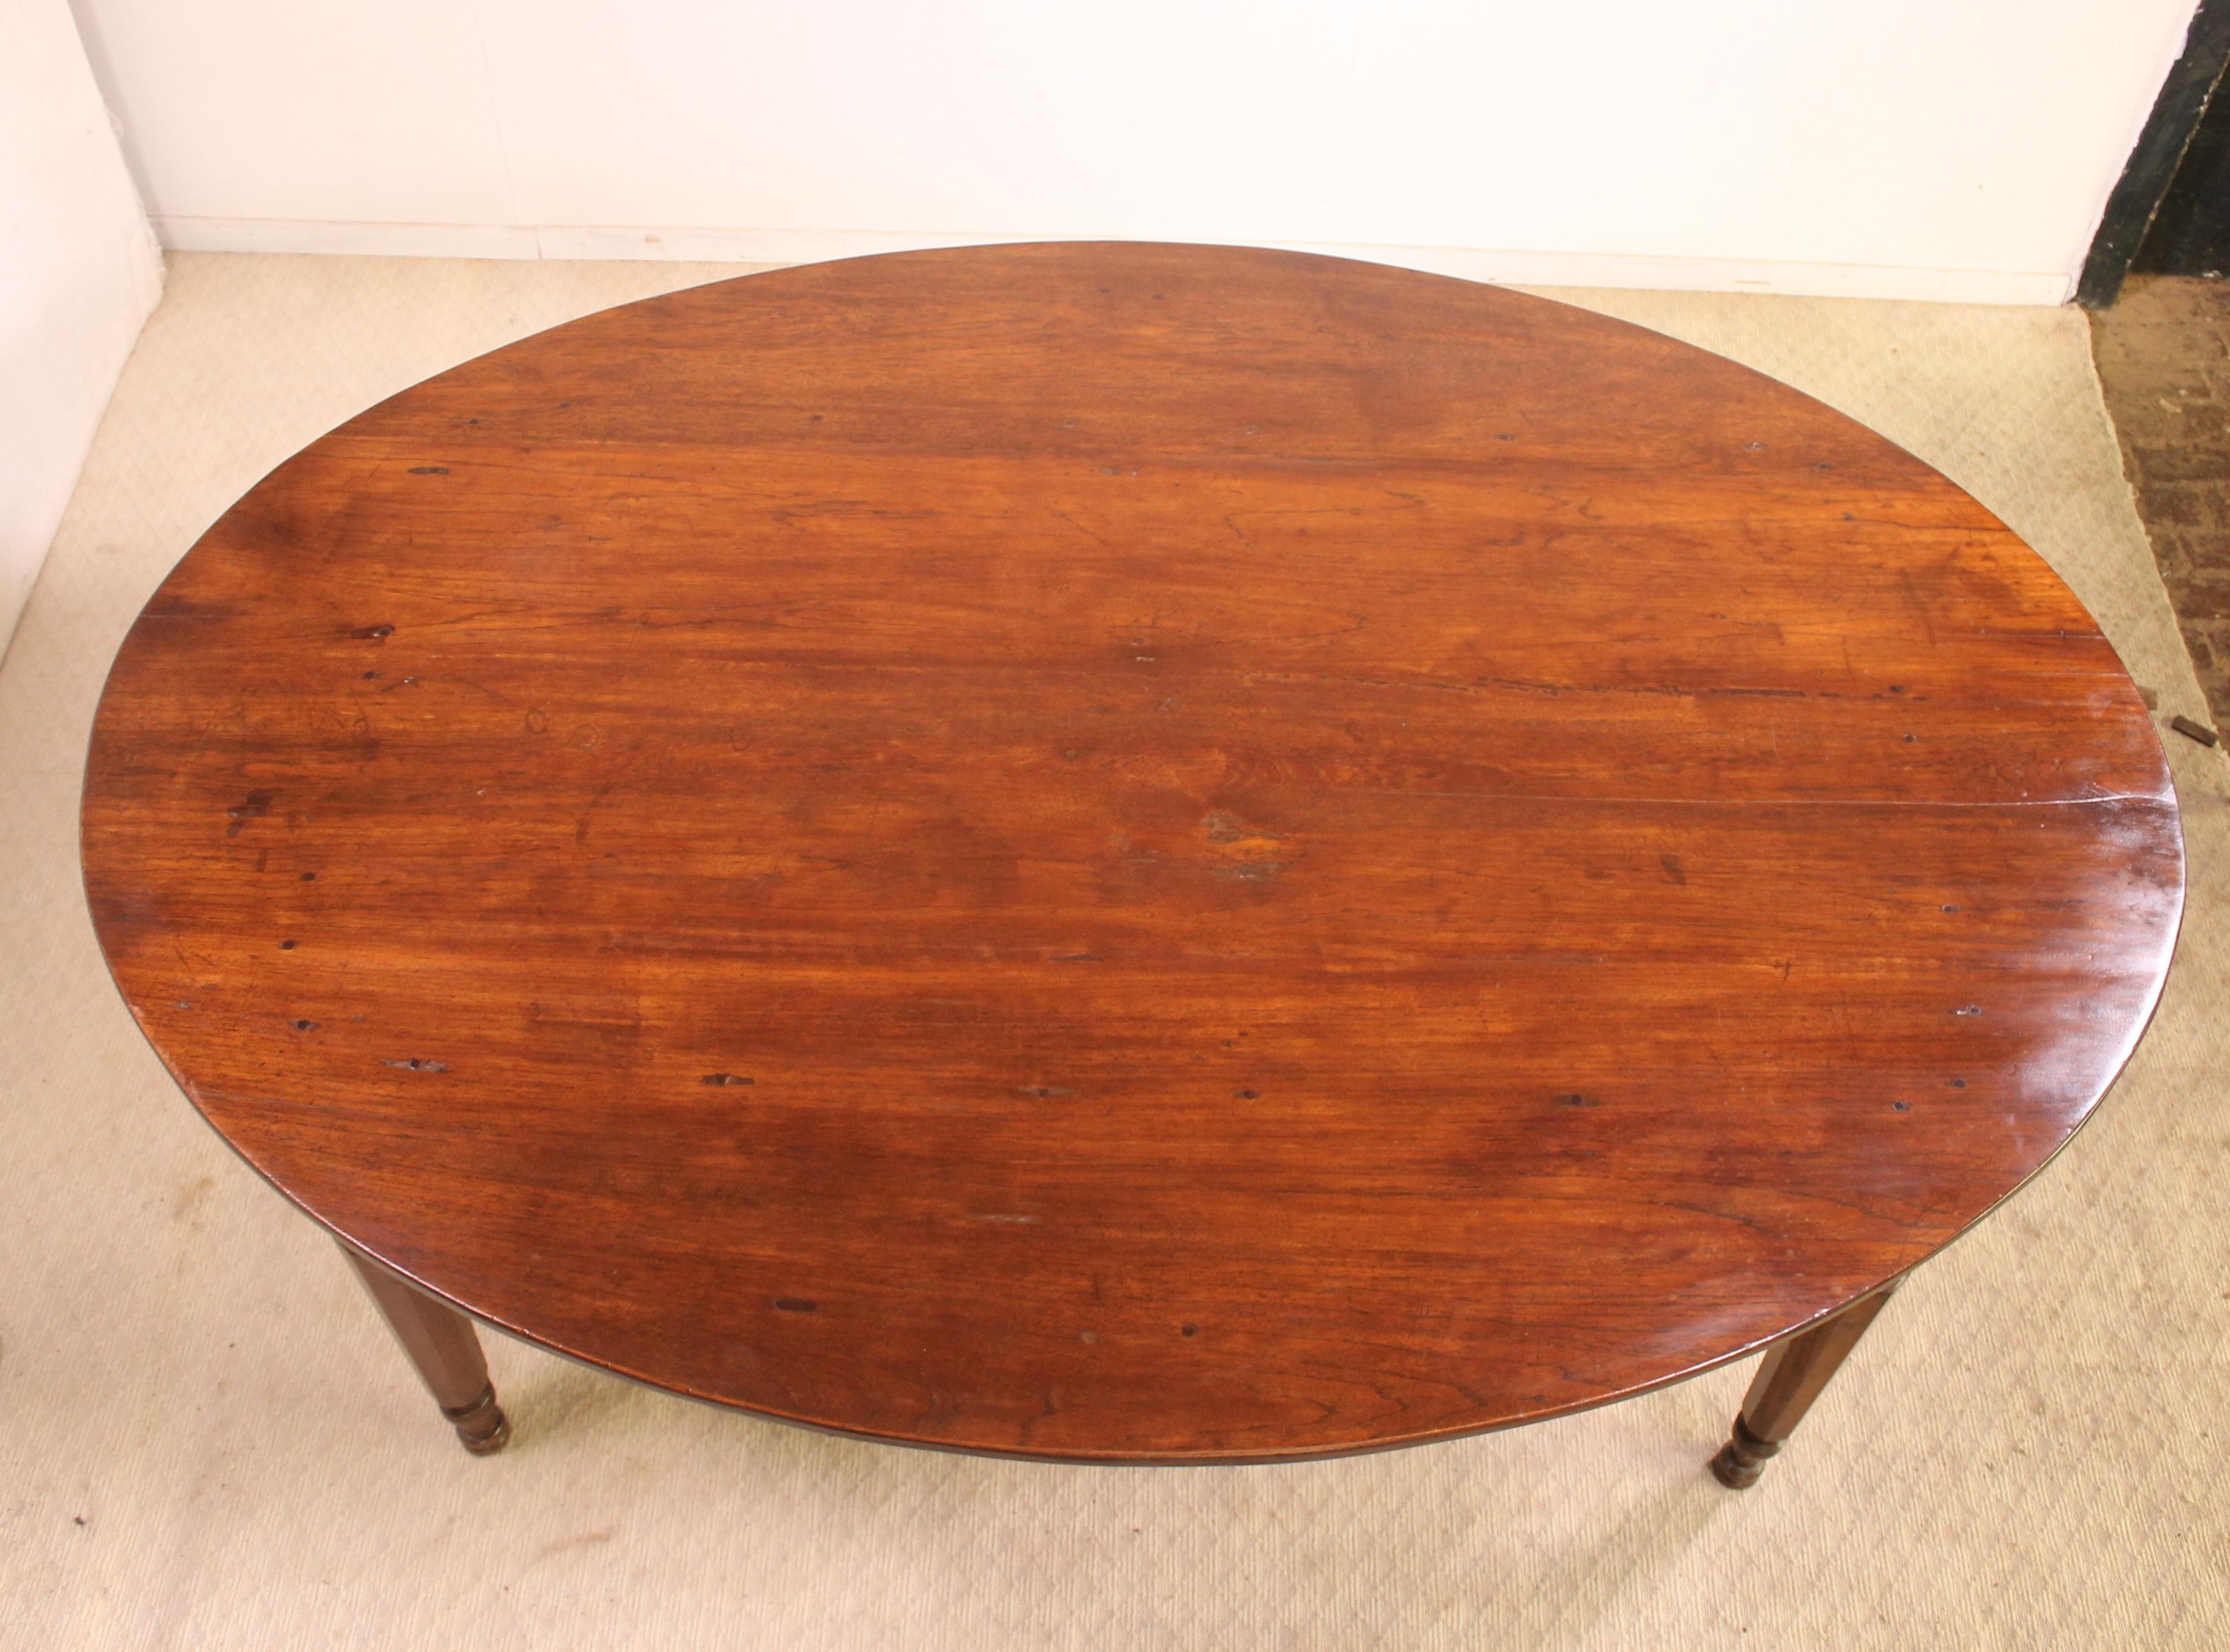 Refectory Table Ellipse Shaped, 19th Century 2